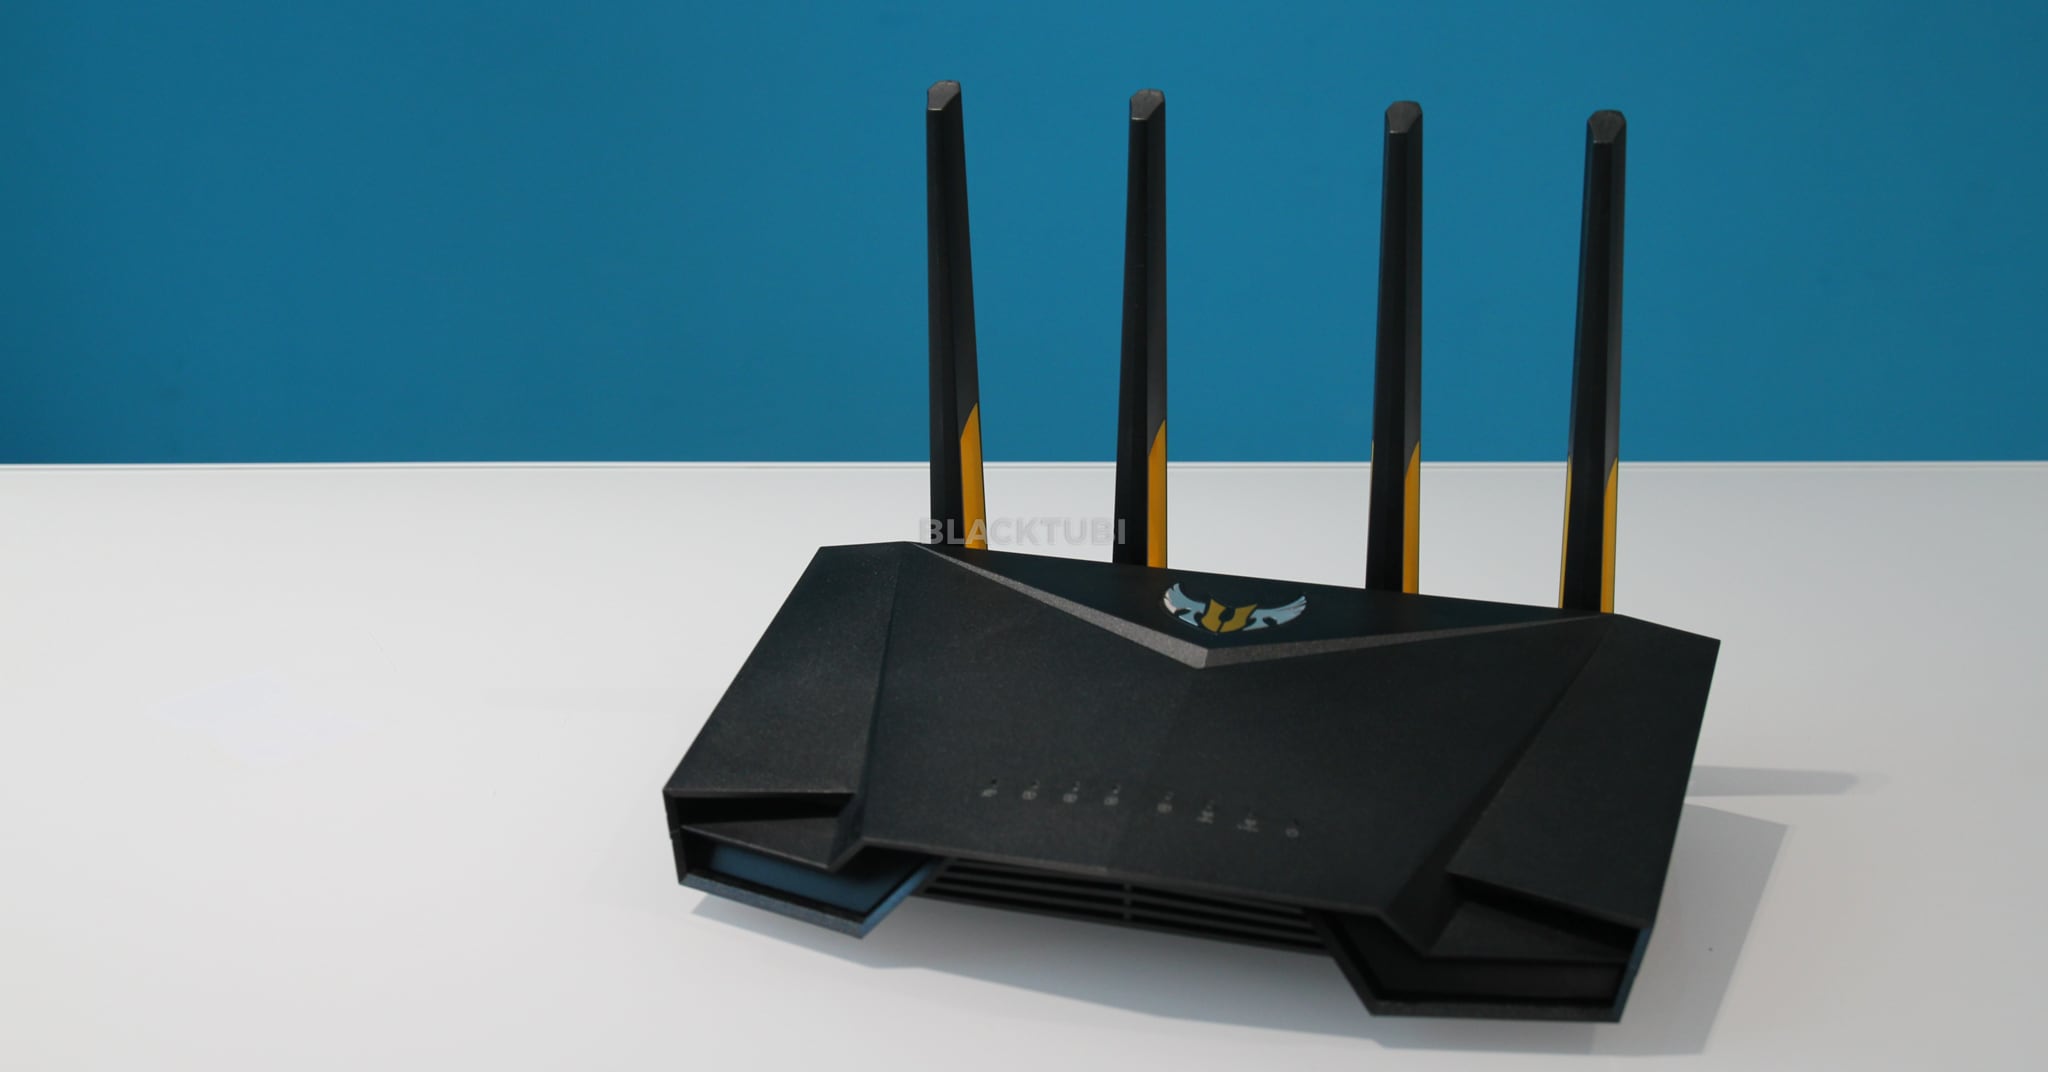 ASUS Wi-Fi 6 Router Review